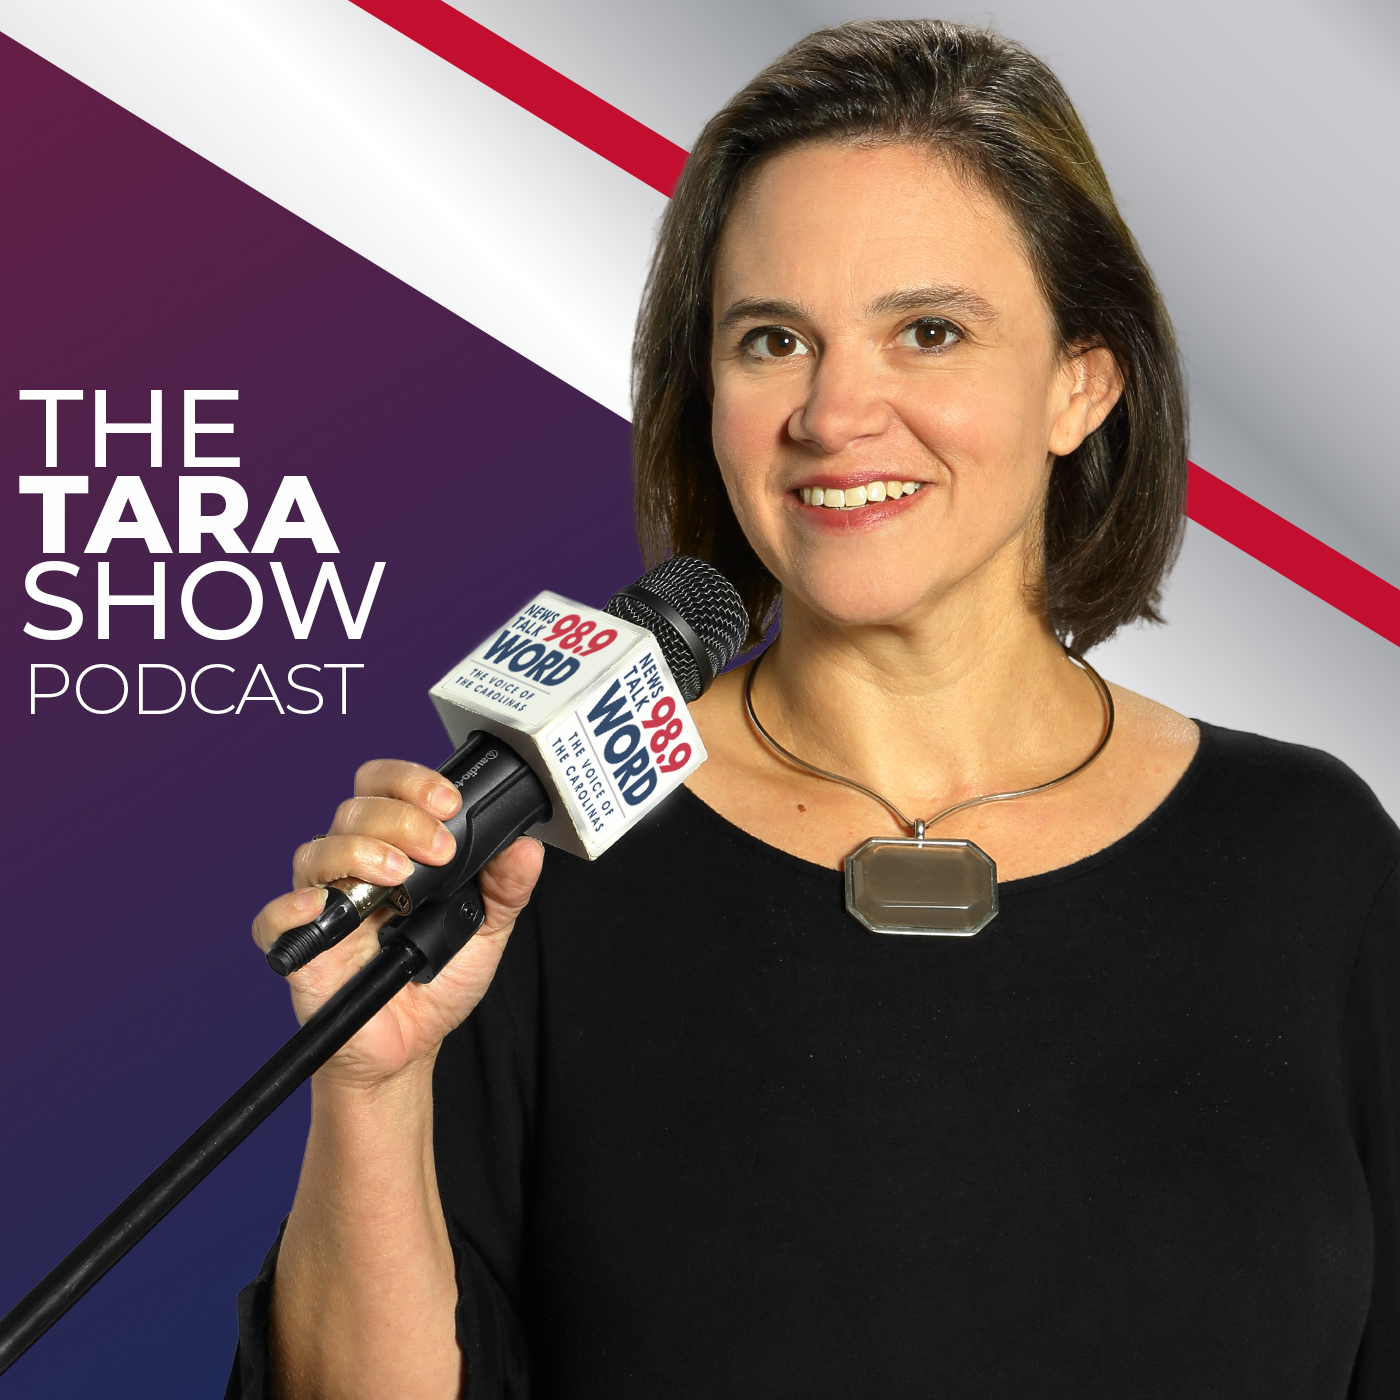 Hour 1: The Tara Show - “The Obama Biden Coalition is Falling Apart” “Sheri Biggs Funding and Bloomberg” “Sheri Biggs Stumbles through Bloomberg Accusations” “Get out and Vote” 